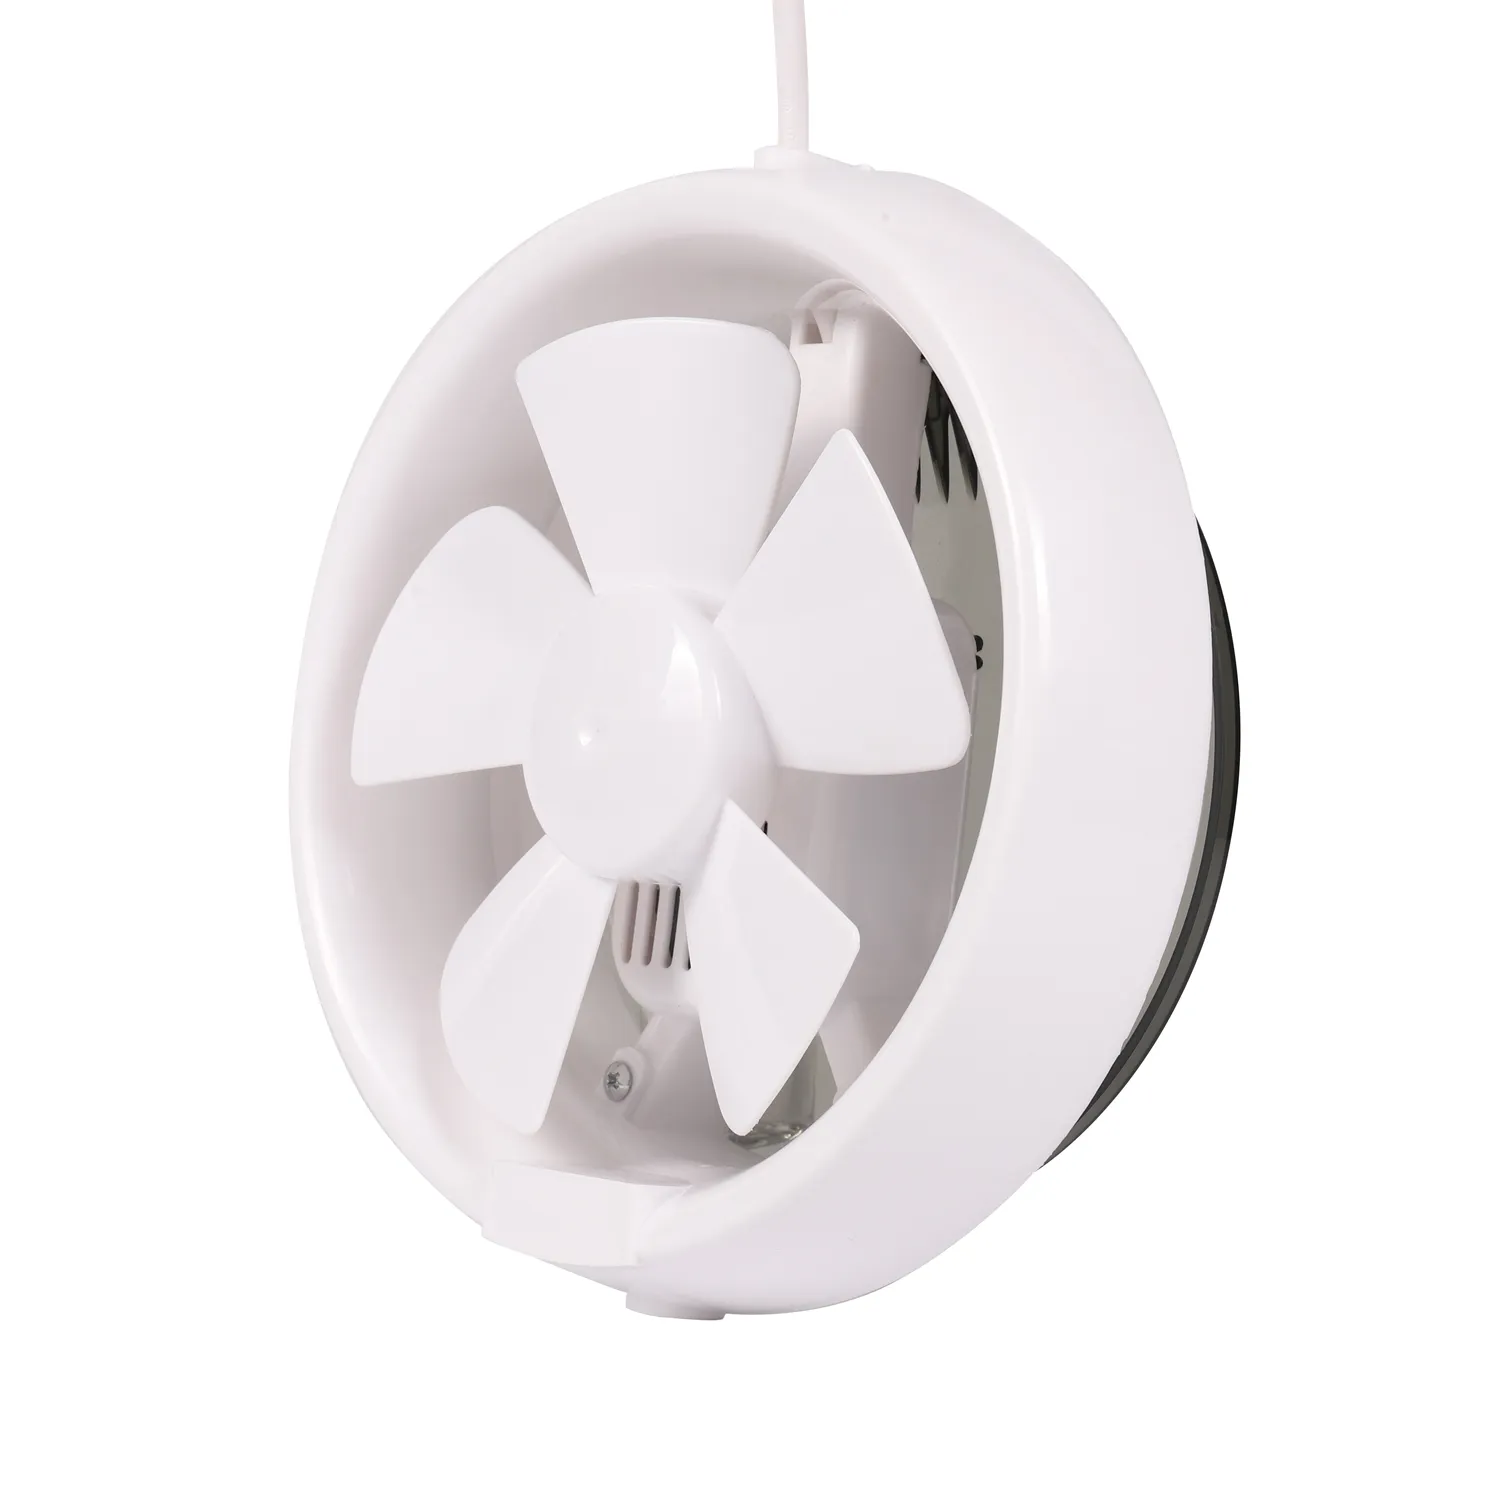 Hot Sell Round Silent PP Plastic Mini Bathroom Glass Window Ventilation Exhaust Fan with Pull Cord